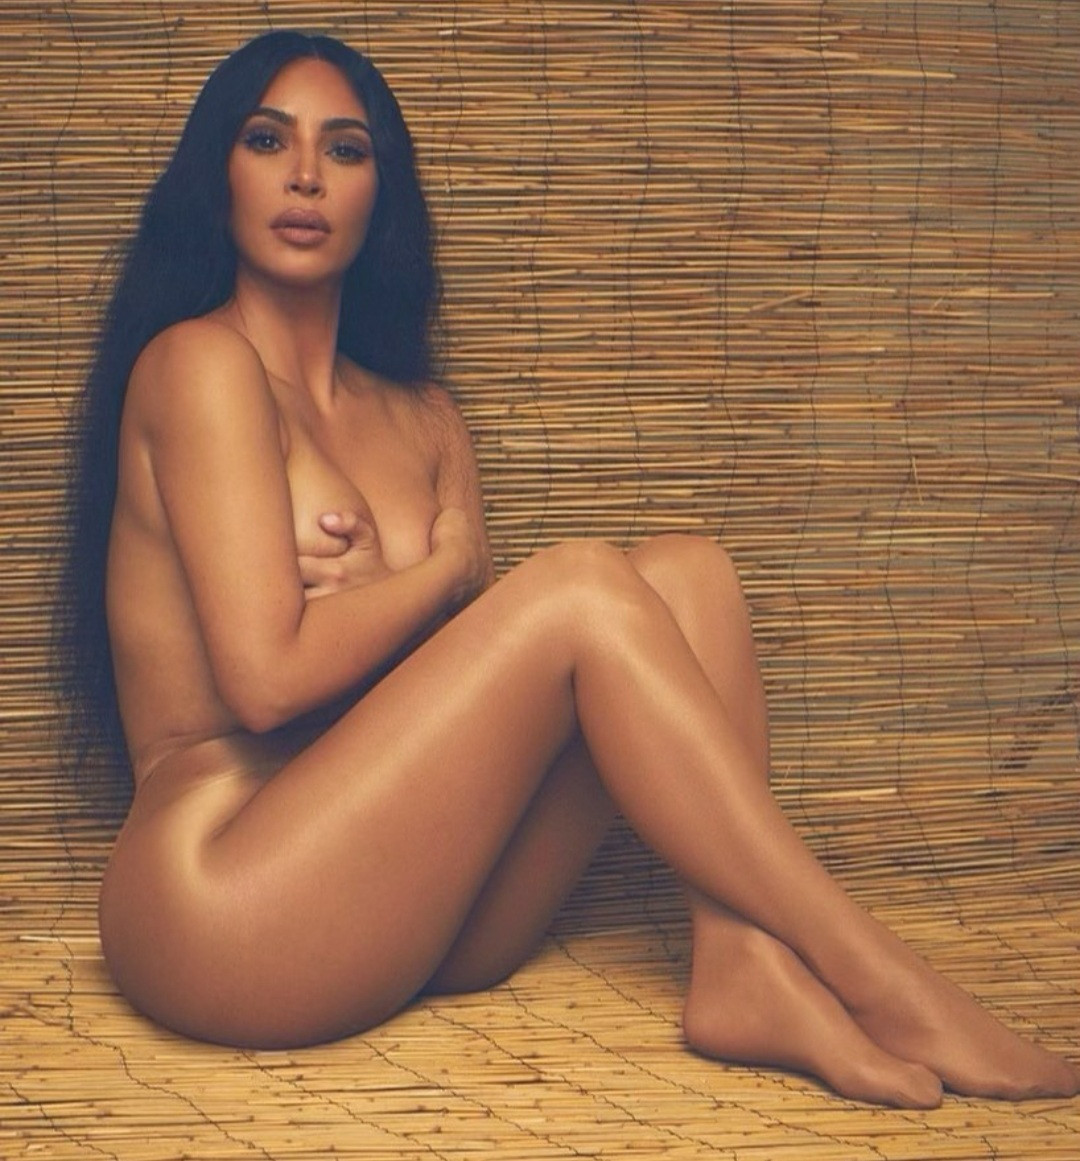 alan holsted recommends kim kardashian pussy pictures pic